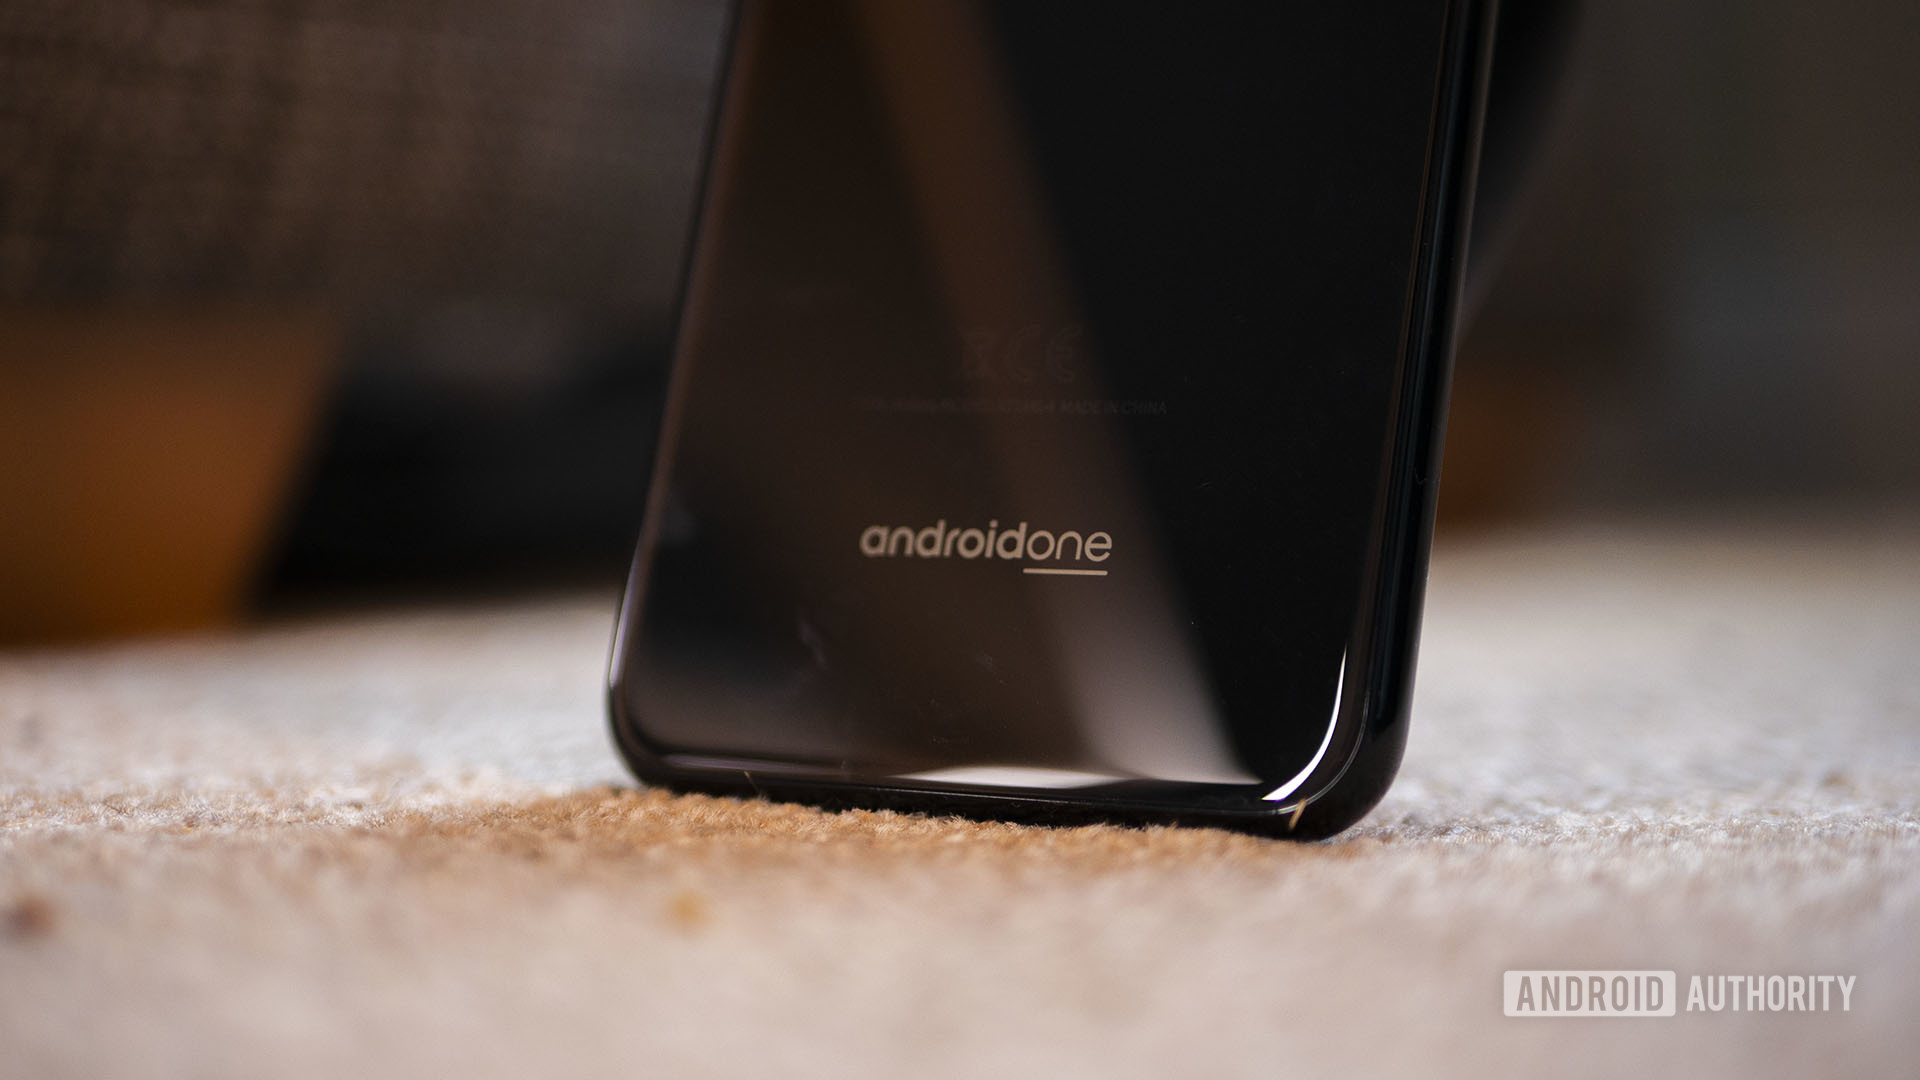 Android One logo